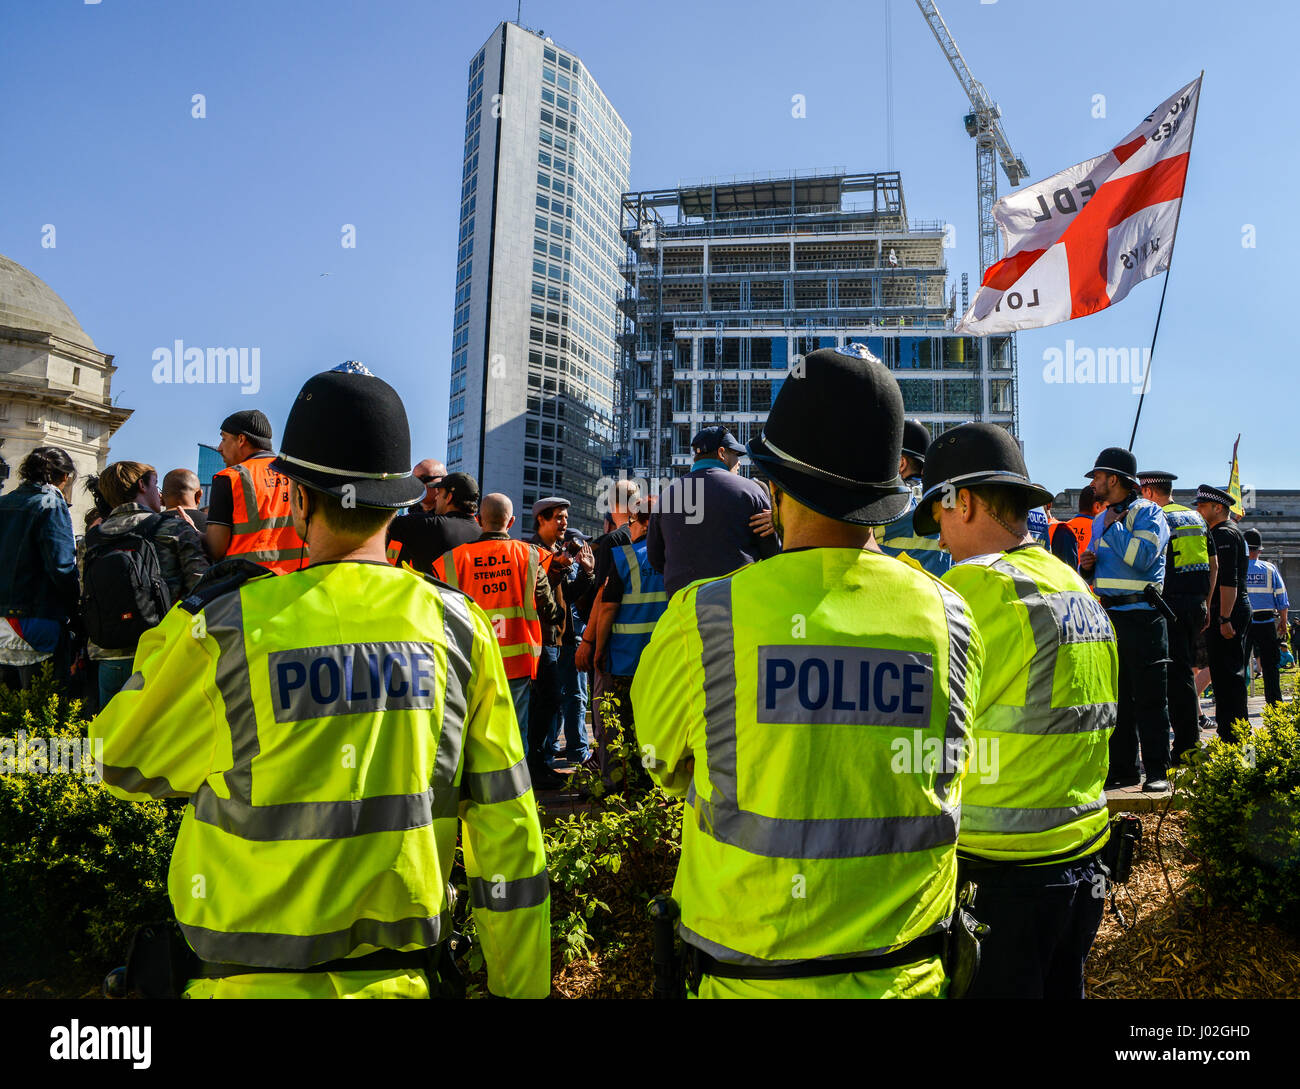 Birmingham, UK. 8th Apr, 2017. On the aftermath of the terrorist attacks in London on March 22nd, the English Defence League (EDL) stages a rally to protest the "islamisation" of the UK, amongst other issues Credit: Alexandre Rotenberg/Alamy Live News Stock Photo